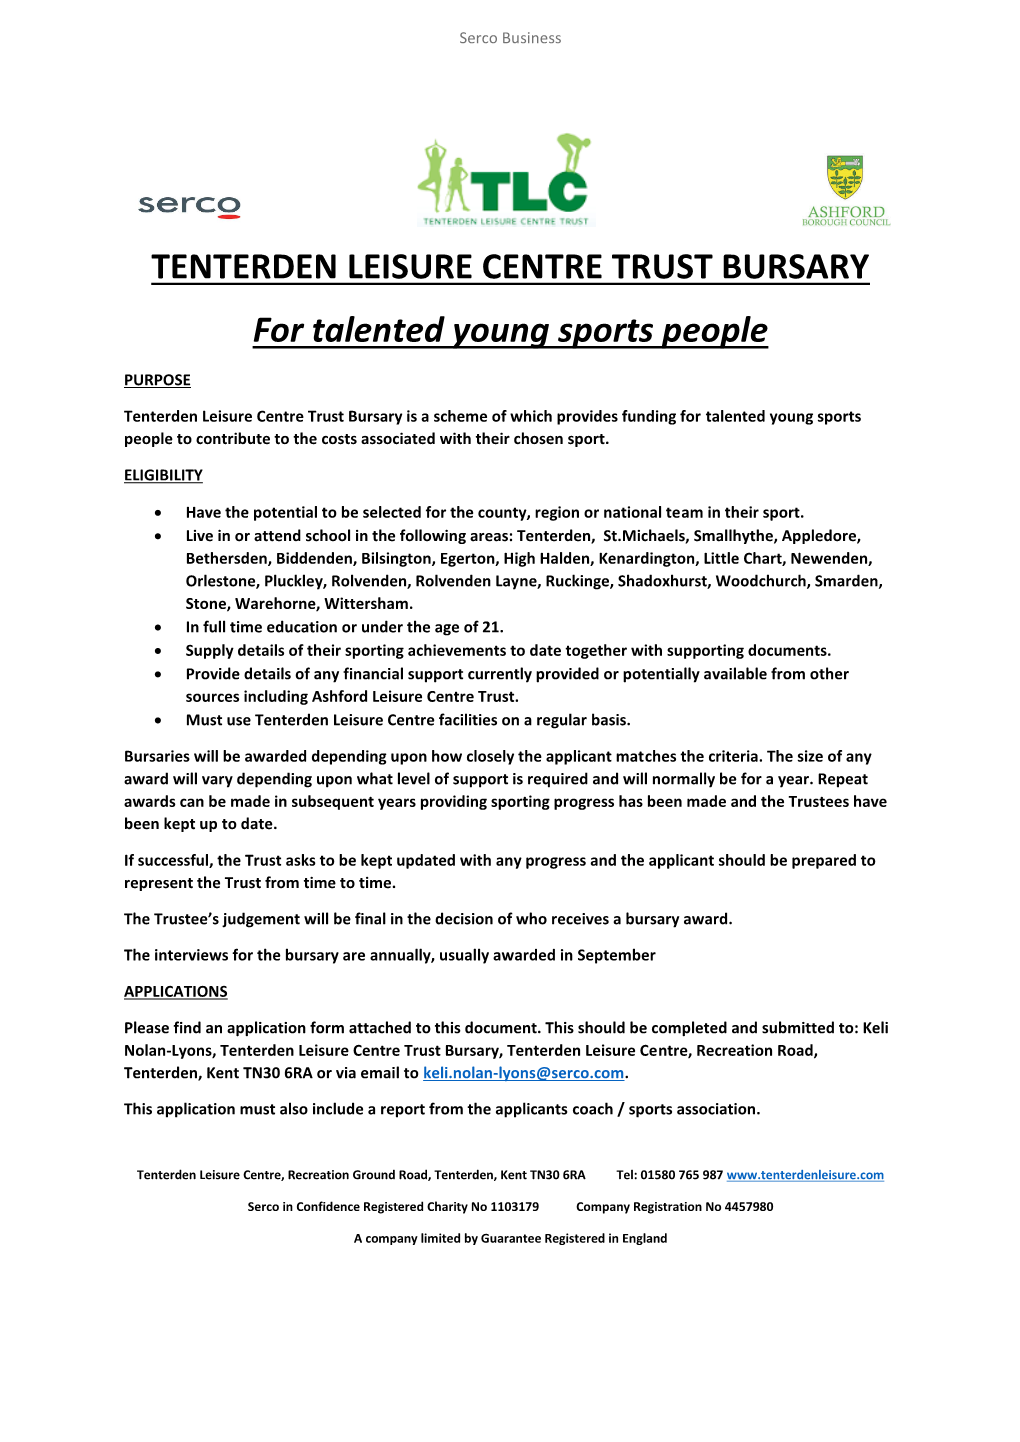 TENTERDEN LEISURE CENTRE TRUST BURSARY for Talented Young Sports People